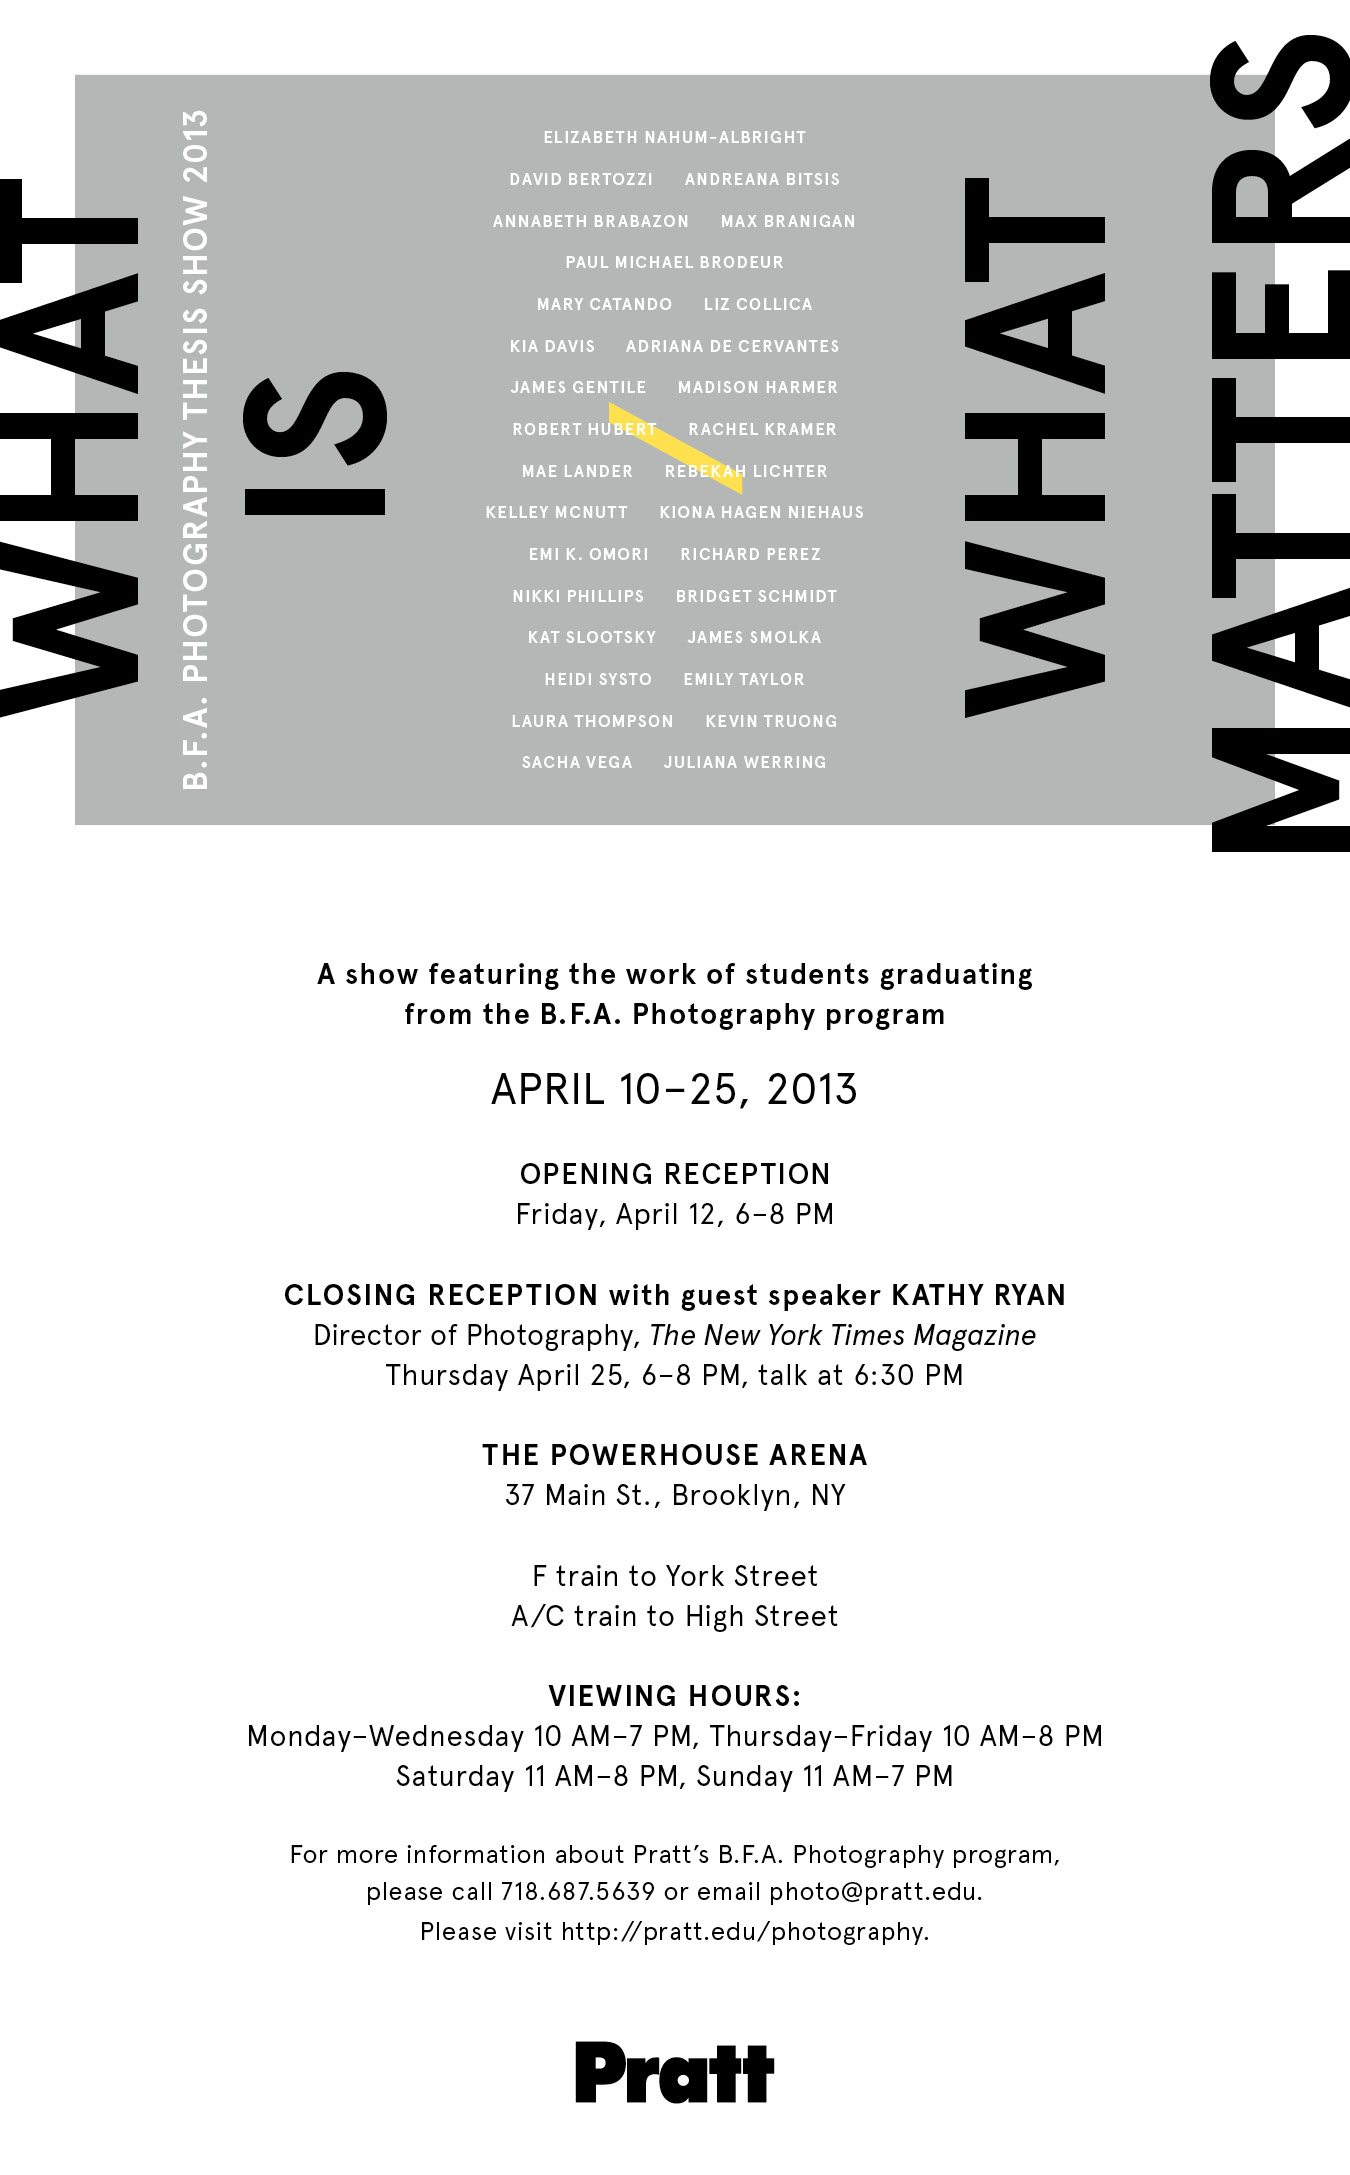 Exhibition: “What Is / What Matters” - Pratt’s B.F.A. Photography Thesis Show 2013